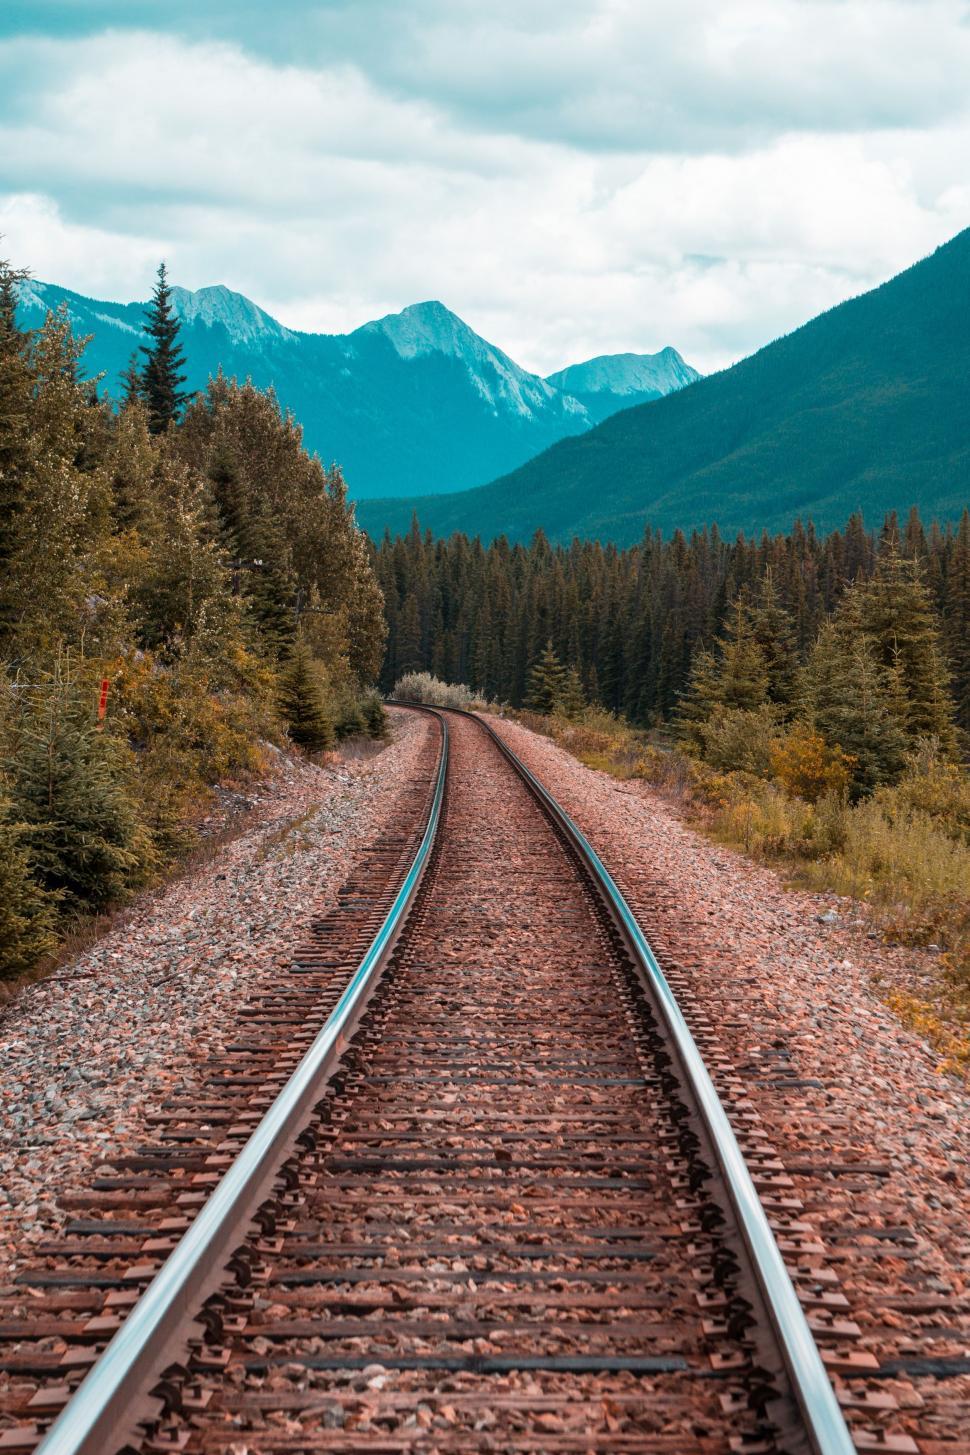 Free Image of Railroad with mountains 